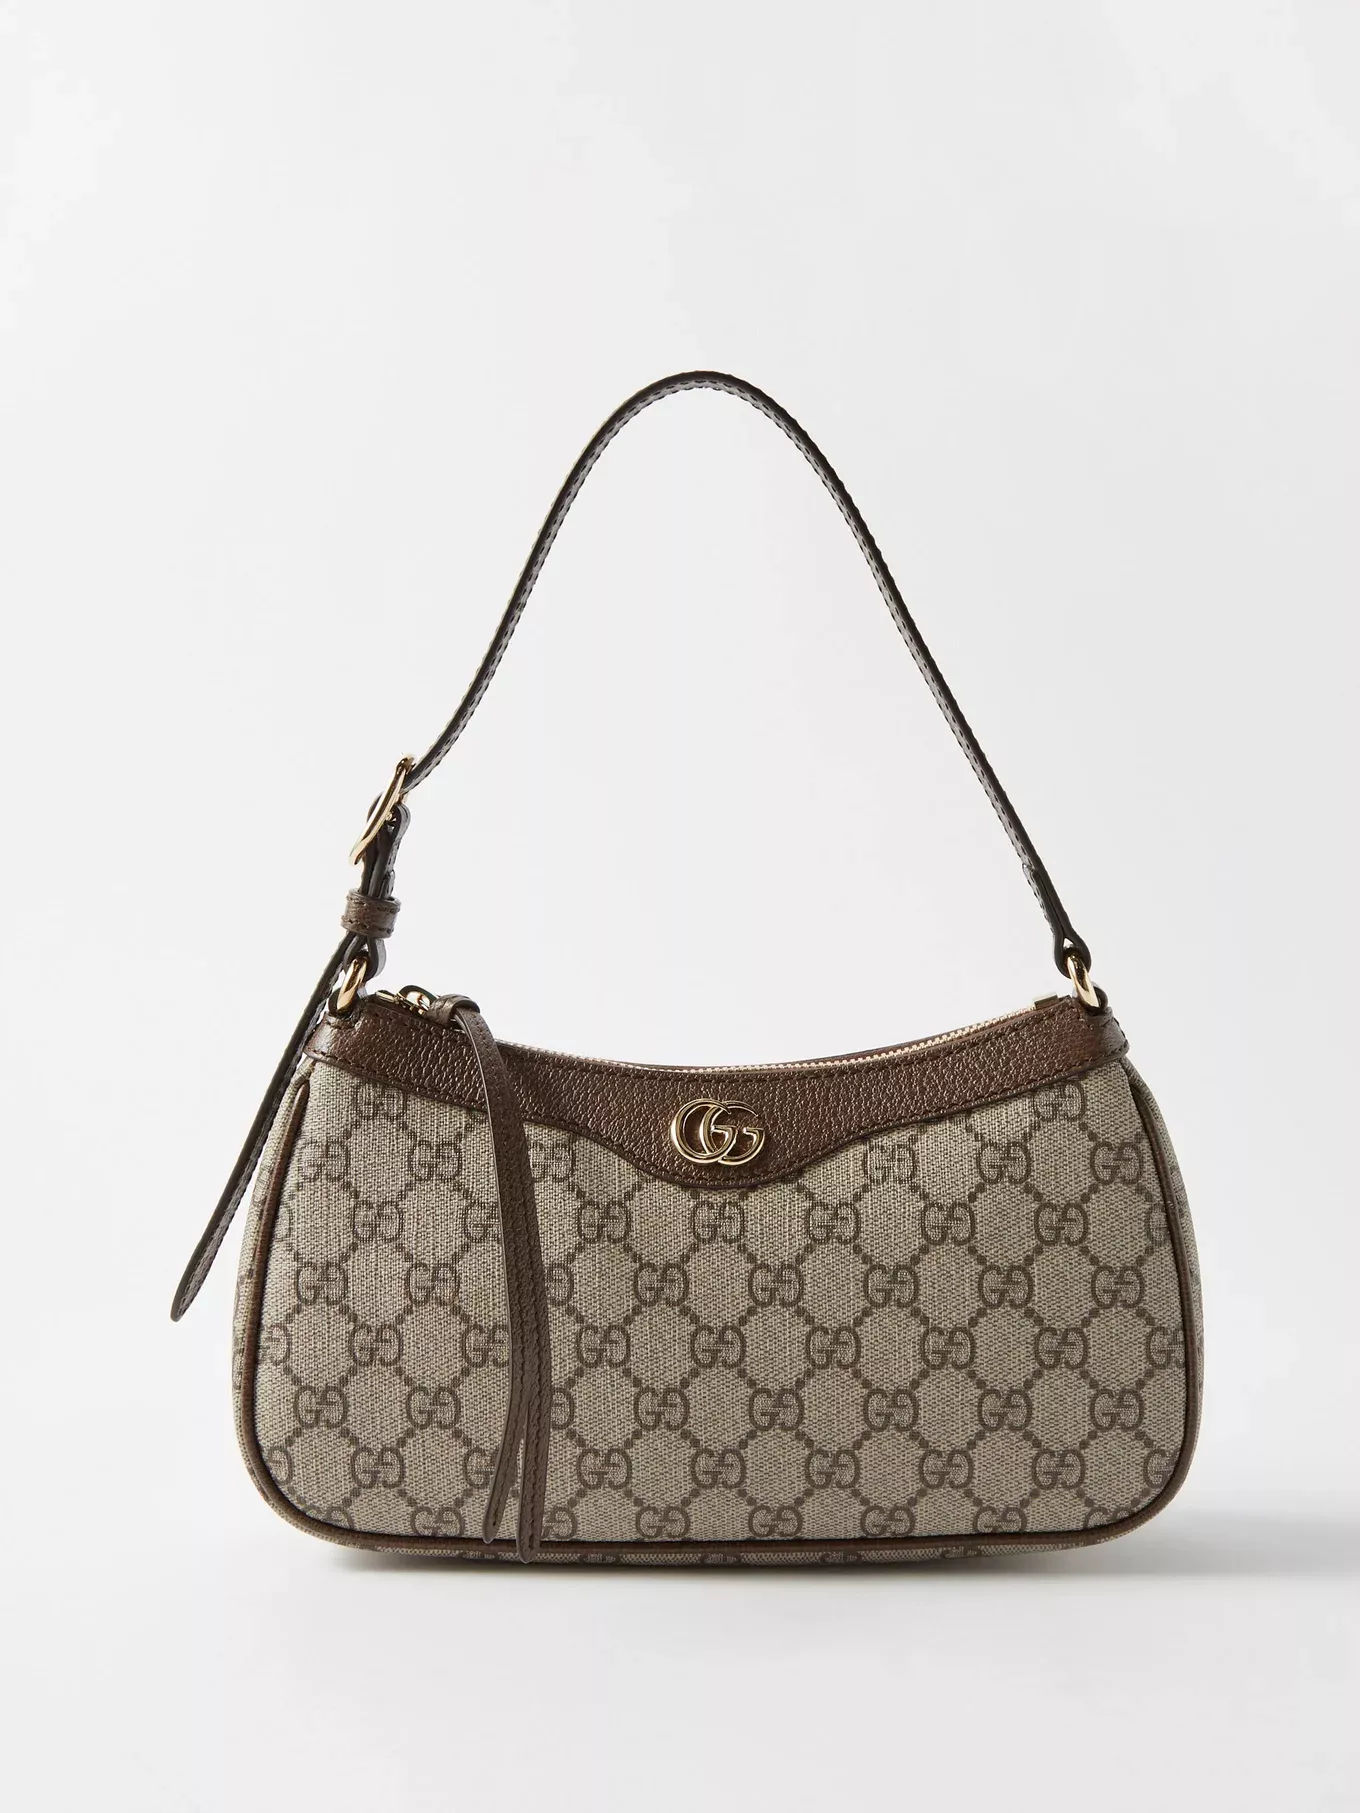 GUCCI Ophidia embellished textured leather-trimmed printed coated